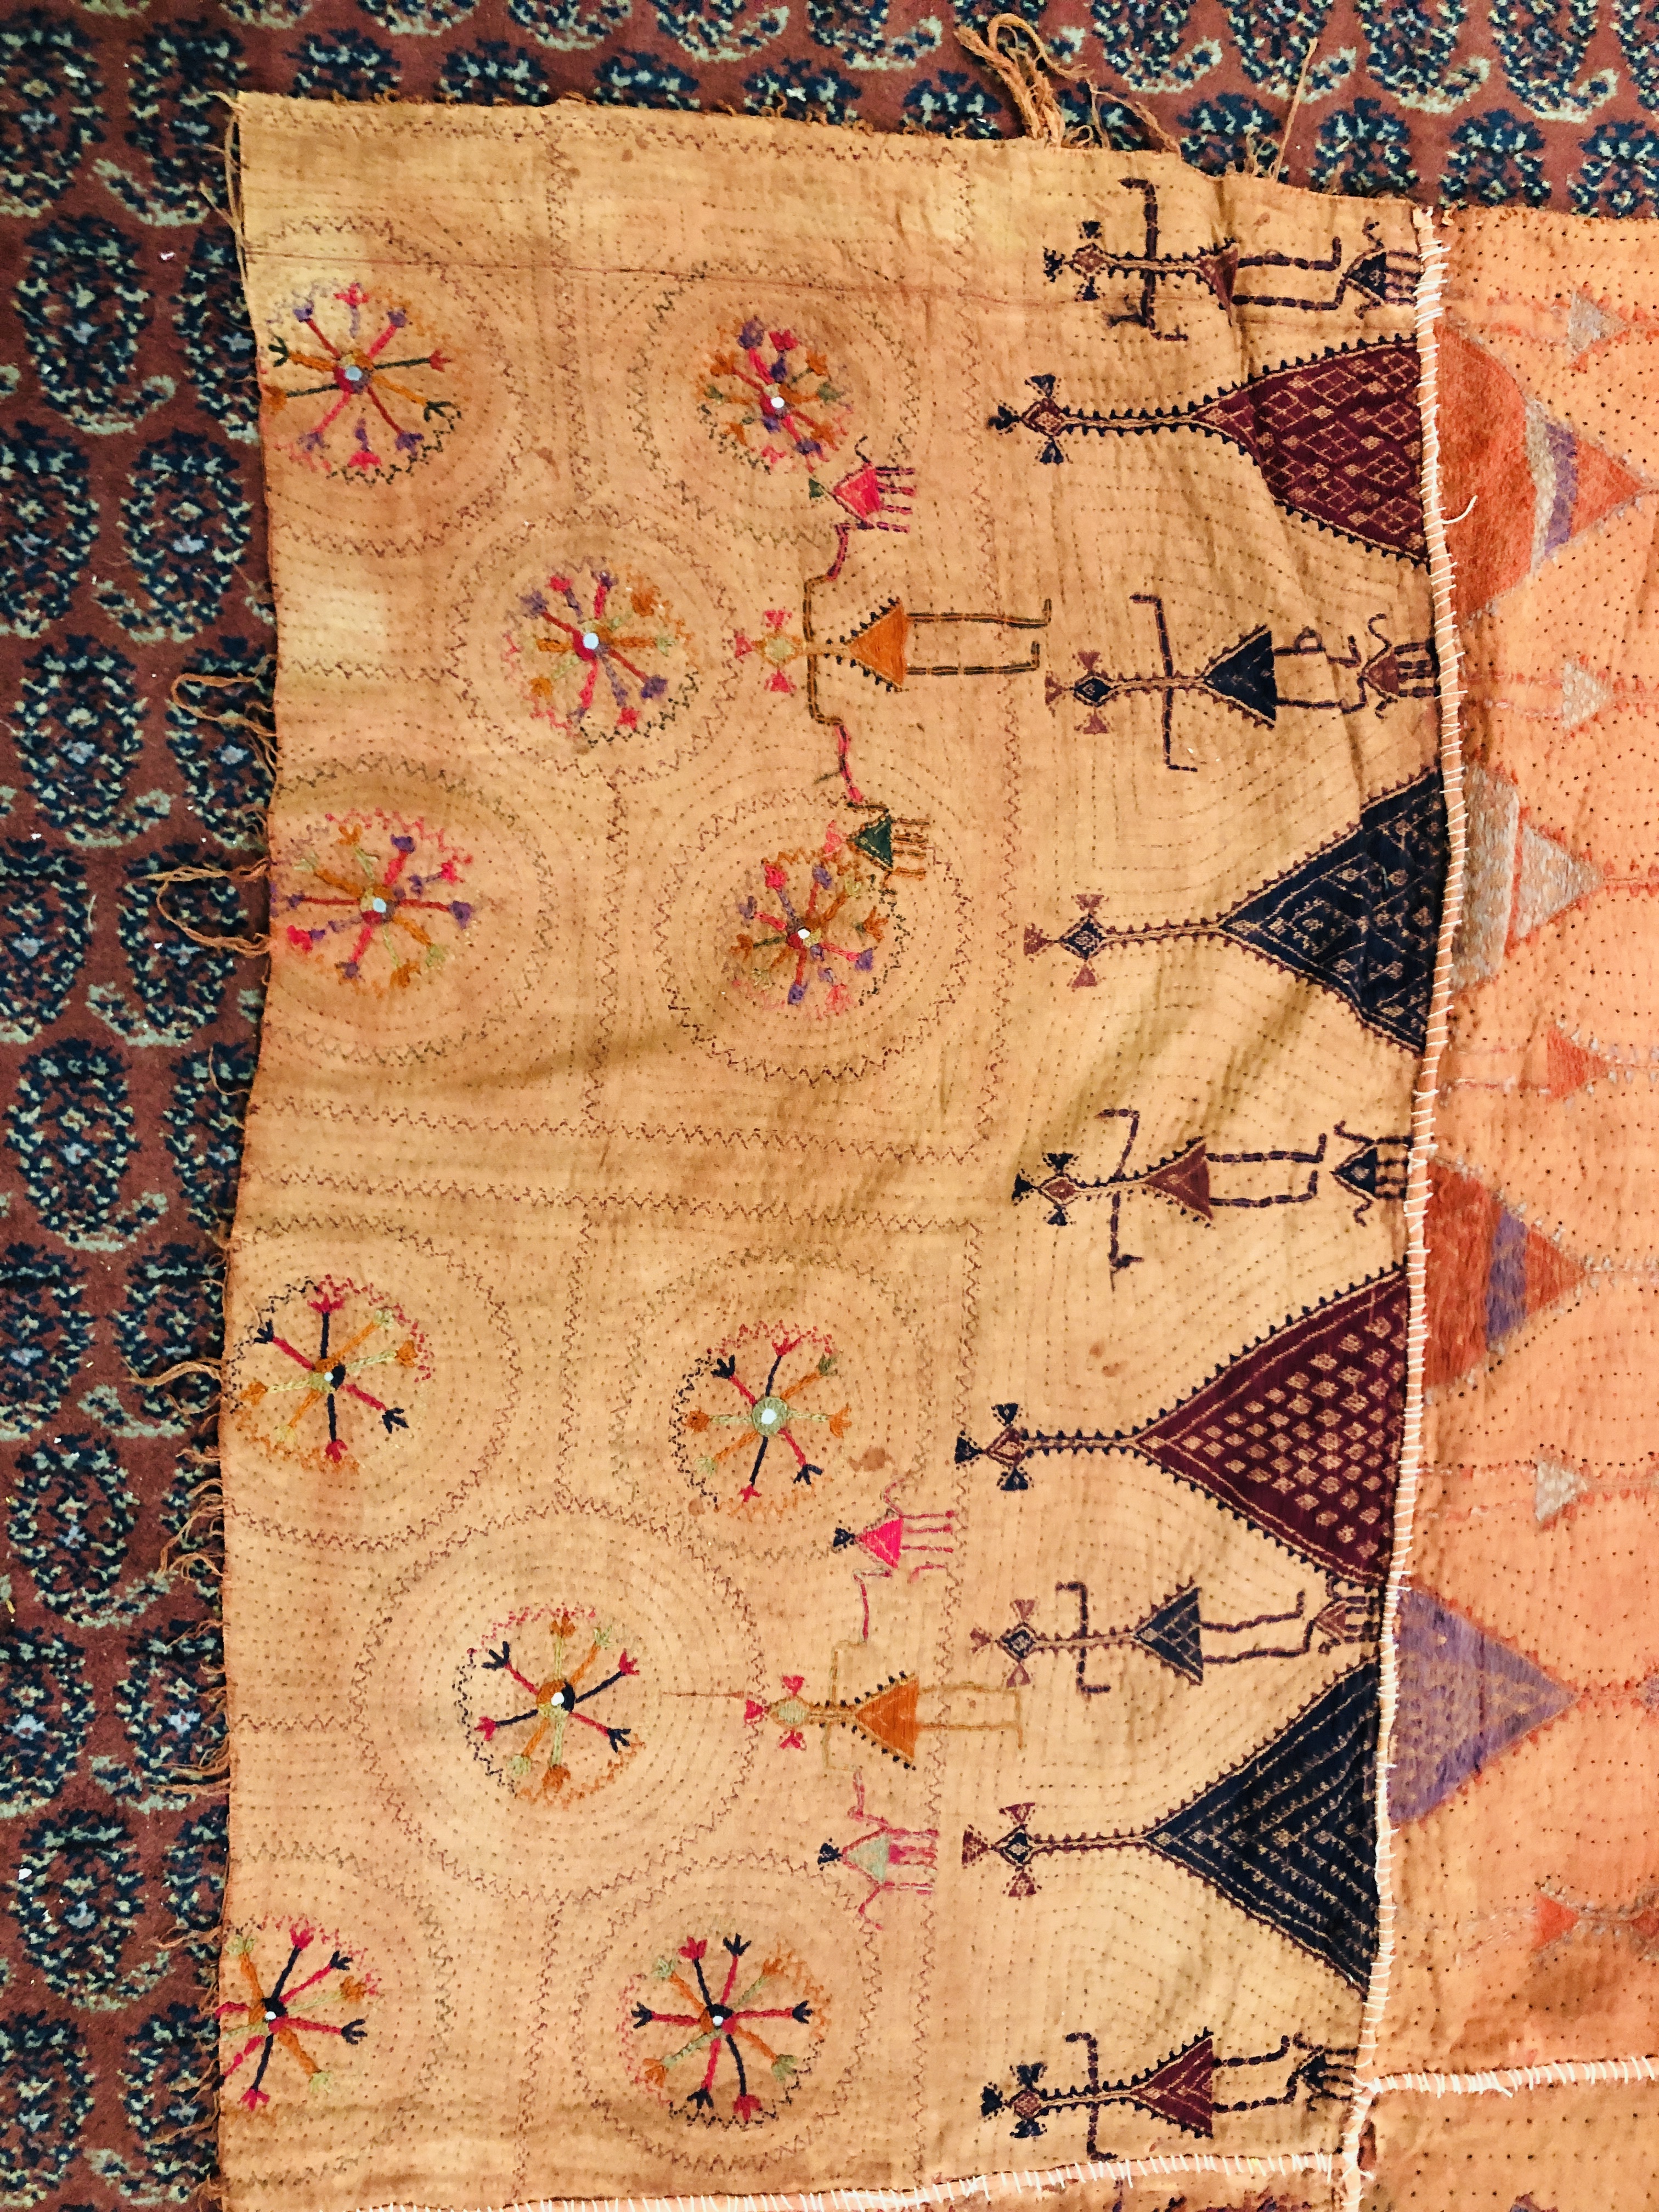 A GROUP OF THREE VINTAGE HAND CRAFTED EMBROIDERED NEEDLEWORK CLOTH PANELS TO INCLUDE A SHISHA - Image 9 of 12